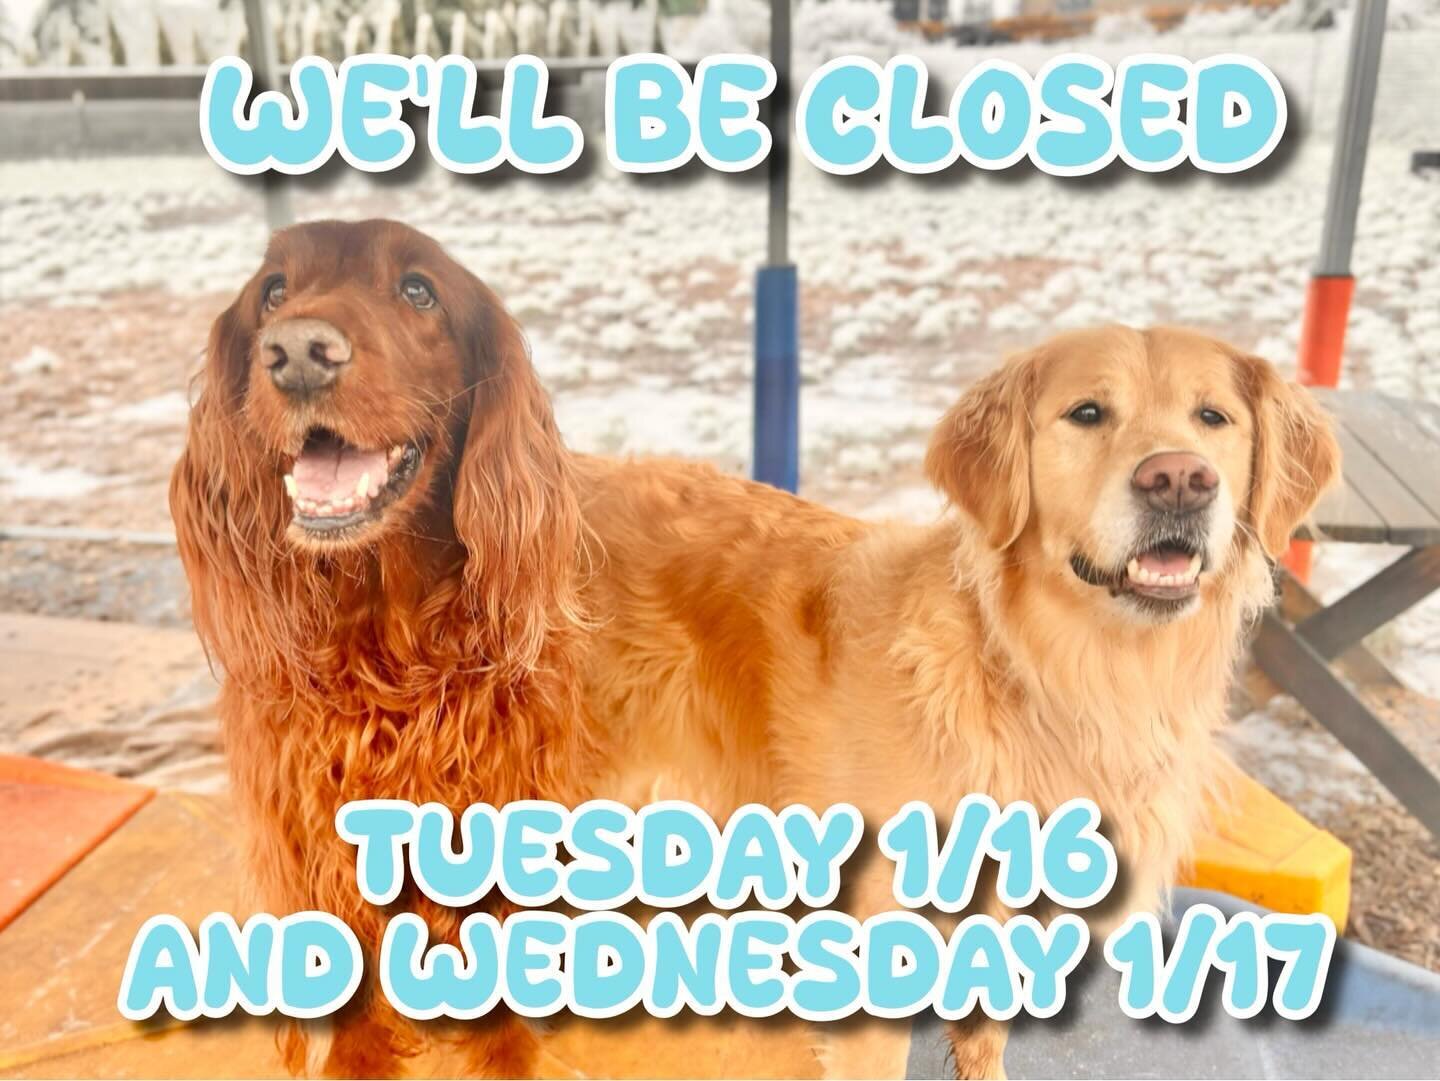 For safety reasons, as well as limited staff availability, we&rsquo;re going to have to close tomorrow the 16th and Wednesday the 17th. We&rsquo;re going to miss all of your pups, but I imagine almost no one is leaving their houses now anyway, so thi